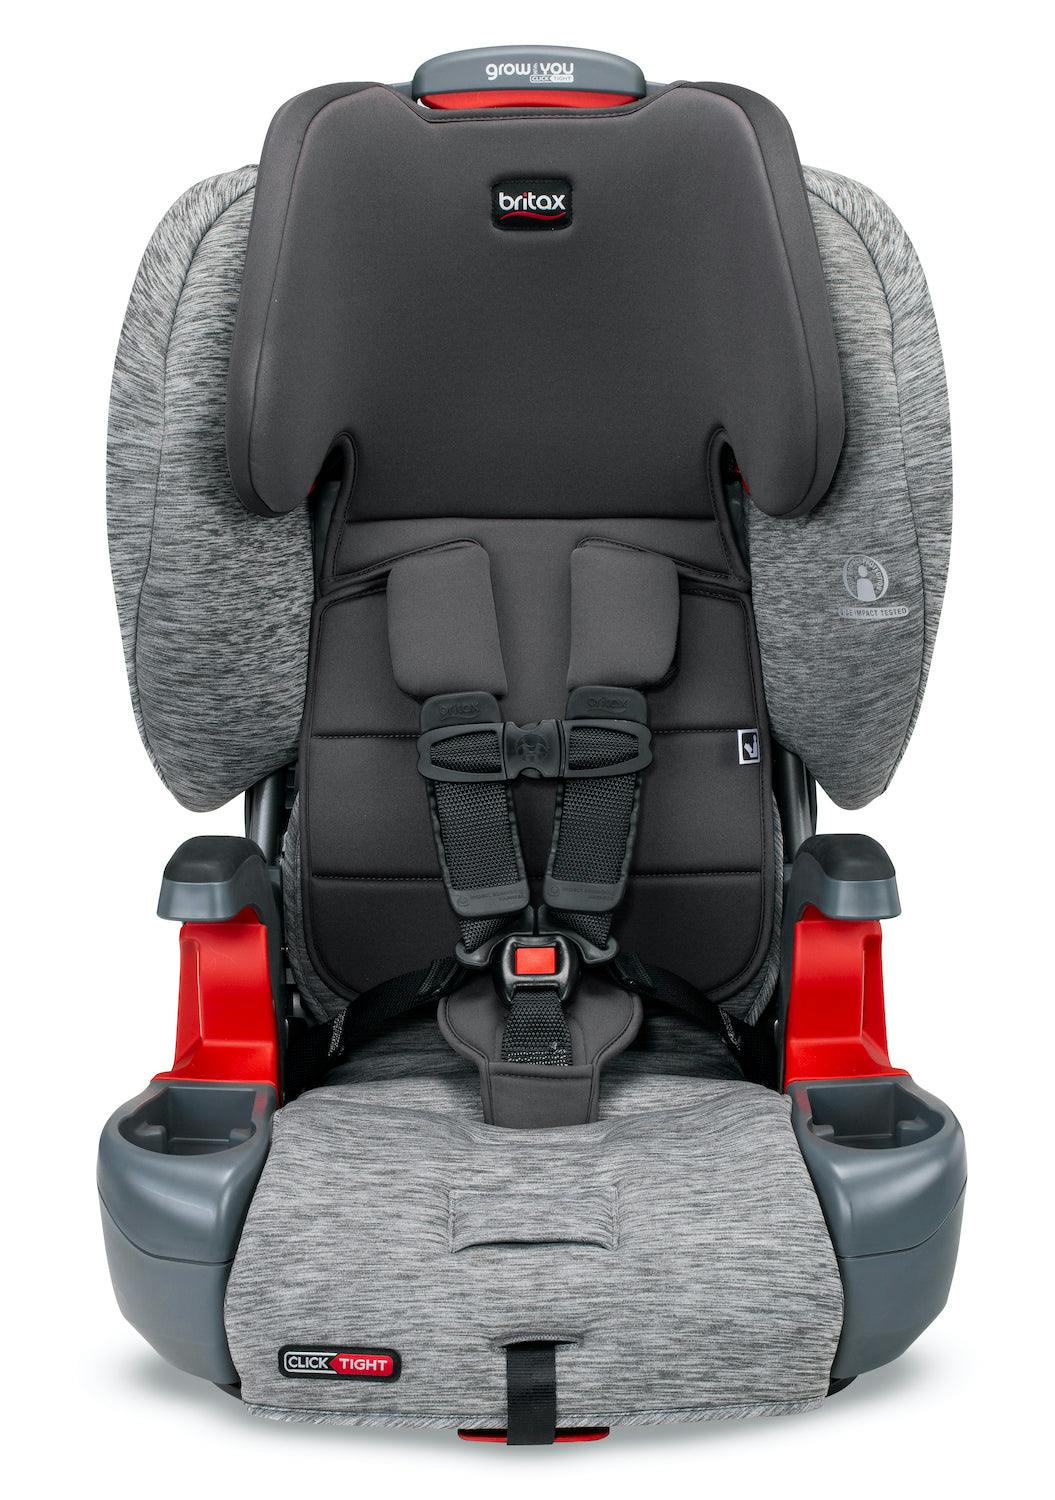 Britax Grow With You ClickTight Harness-2-Booster Car Seat · Asher